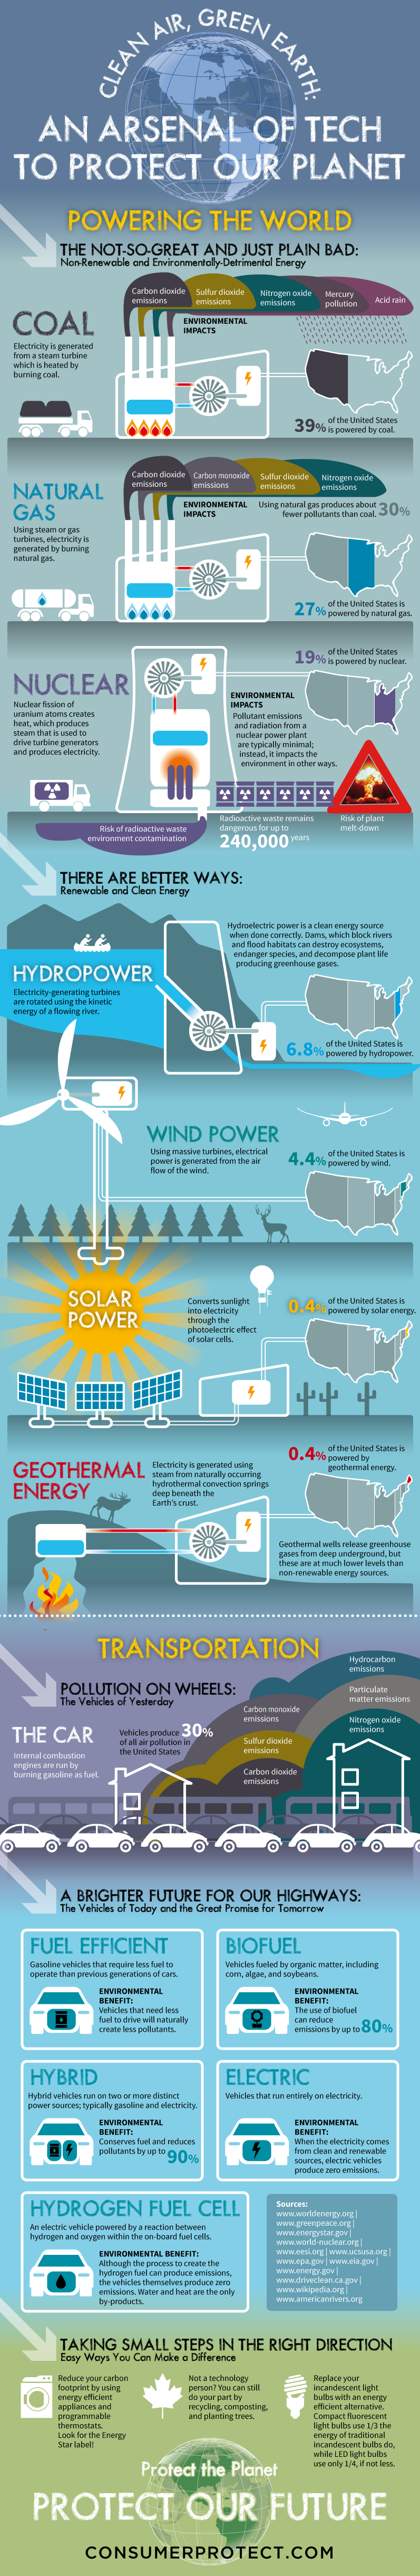 Clean Air, Green Earth: An Arsenal of Tech to Protect Our Planet #infographic